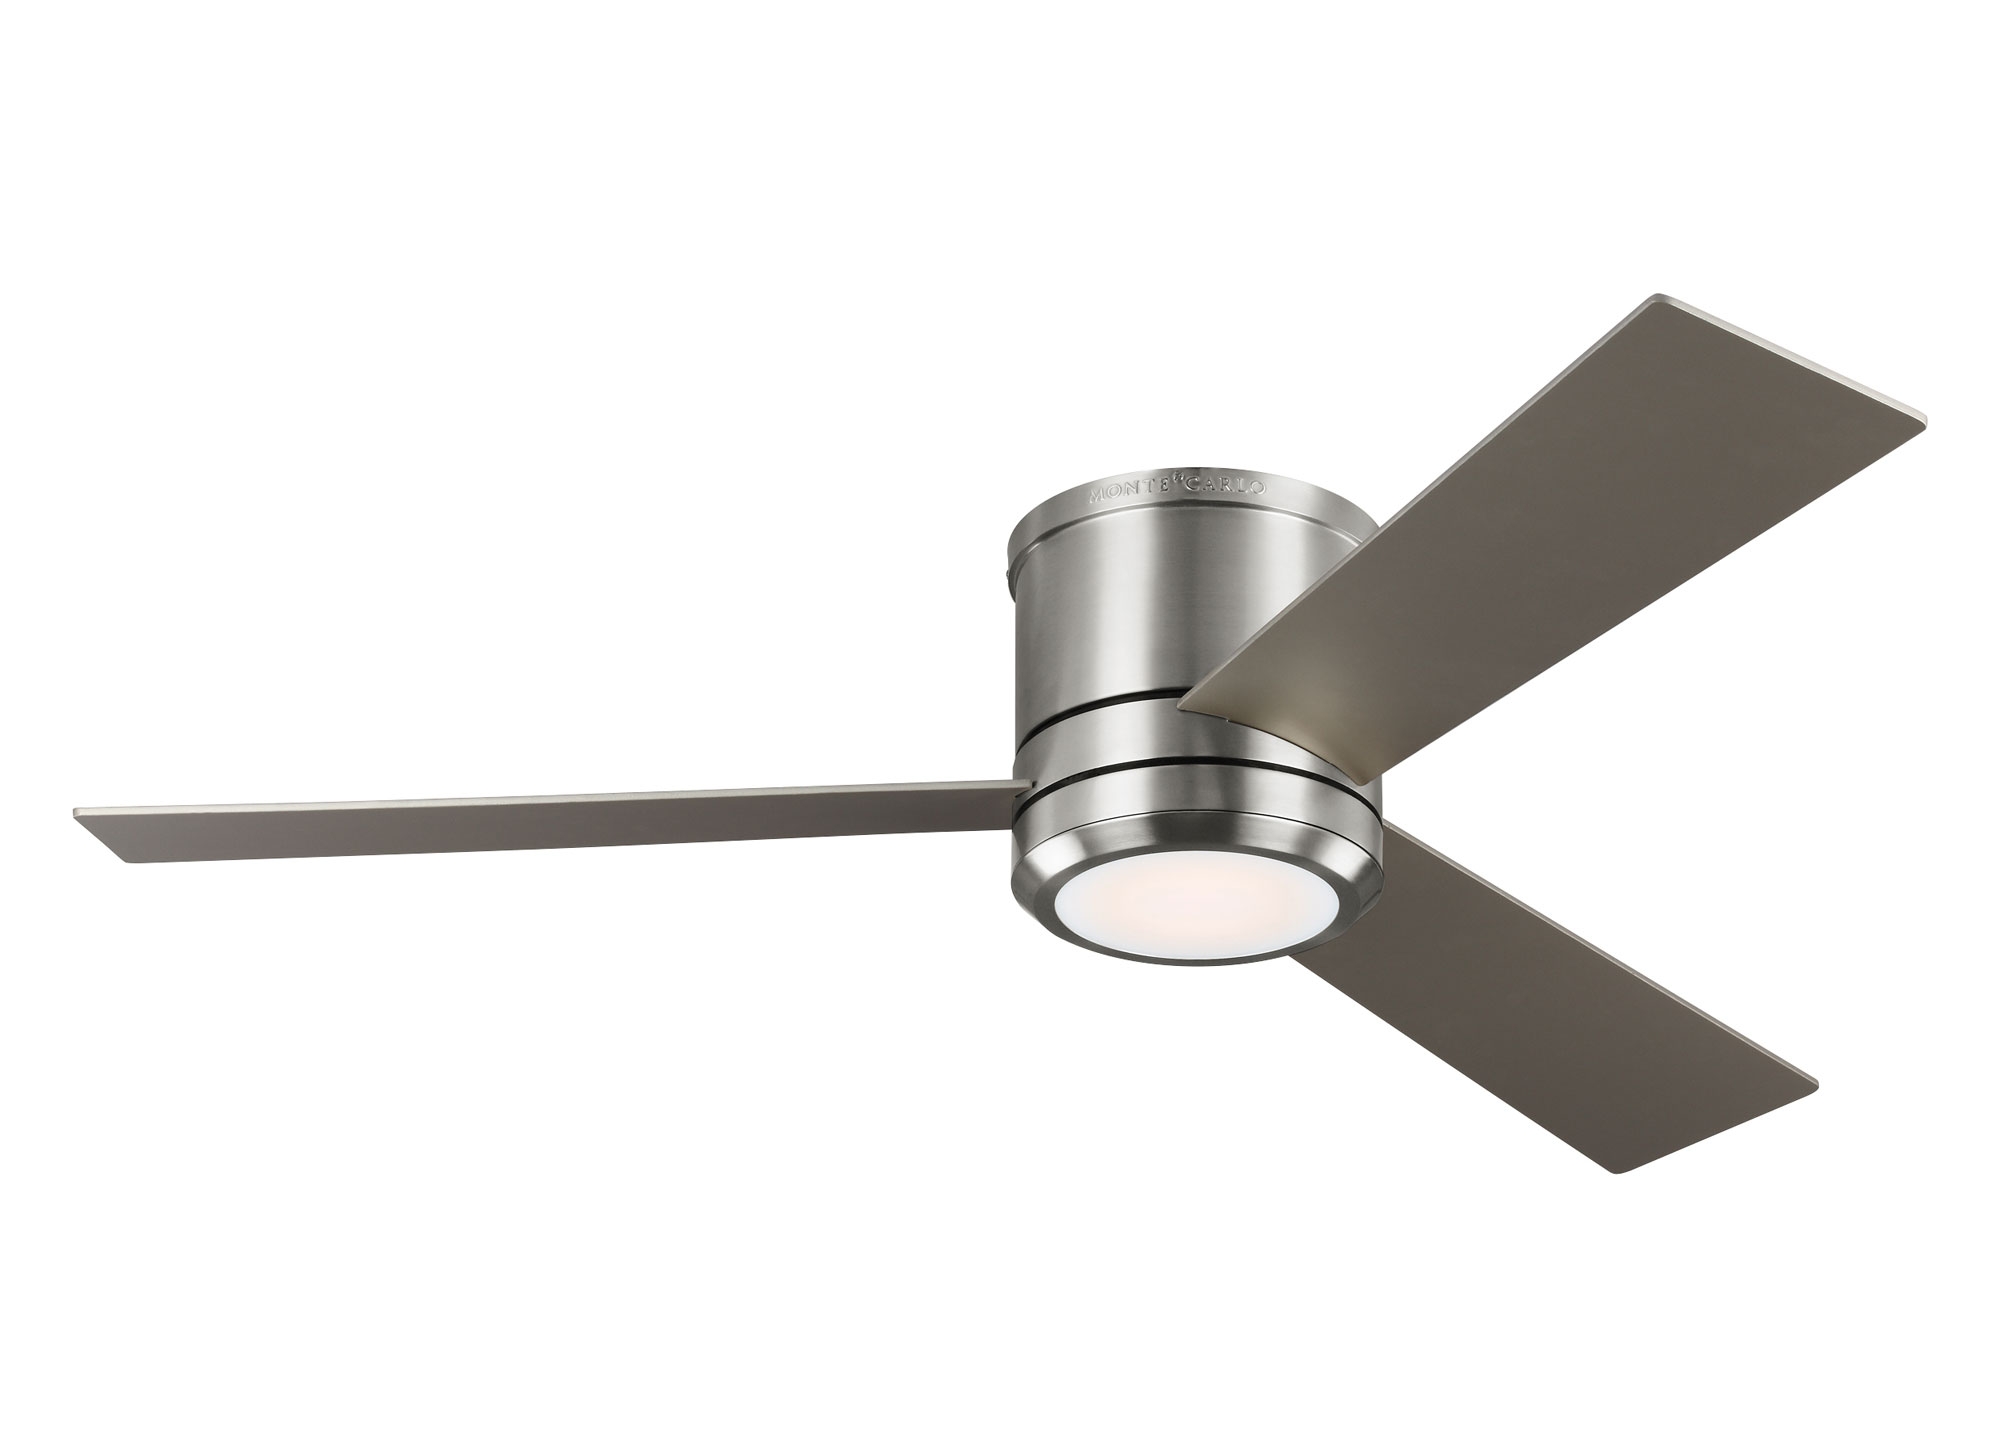 Permalink to Luminous Ceiling Fan With Led Light And Remote